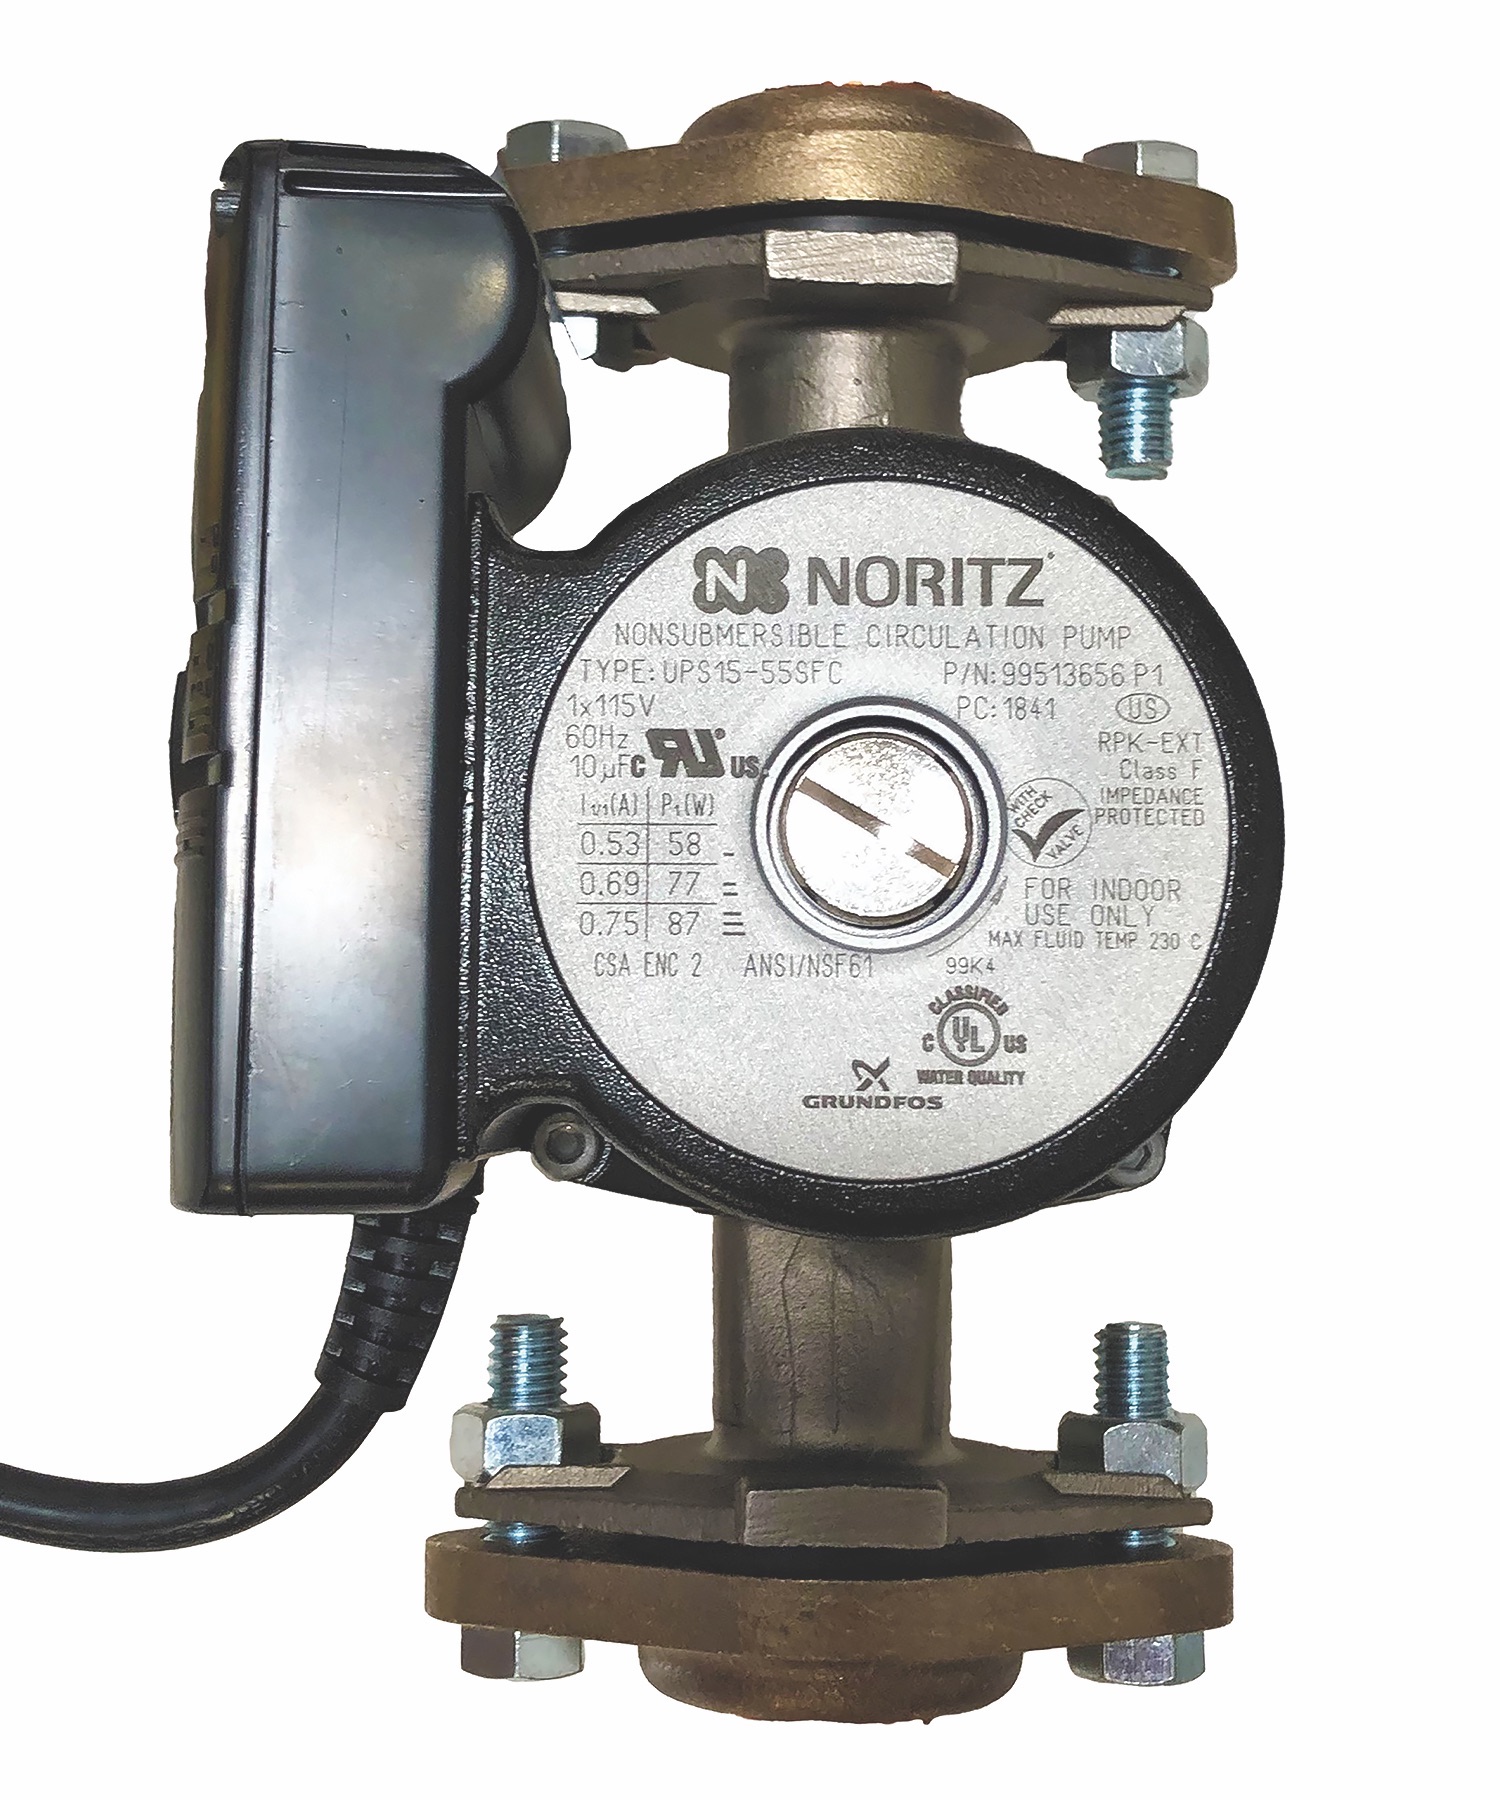 To extend water-saving capabilities for its array of tankless residential models, Noritz has released its RPK-EXT External Pump Kit for recirculation. Available as a separate add-on component to 26 additional Noritz residential models beyond its NRCP line of condensing tankless water heaters, the kit includes a sensor to monitor the hot-water line and automatically turn off the circulator once it hits the preset temperature. The kit also uses a dedicated return line to send water that’s sitting in the line 